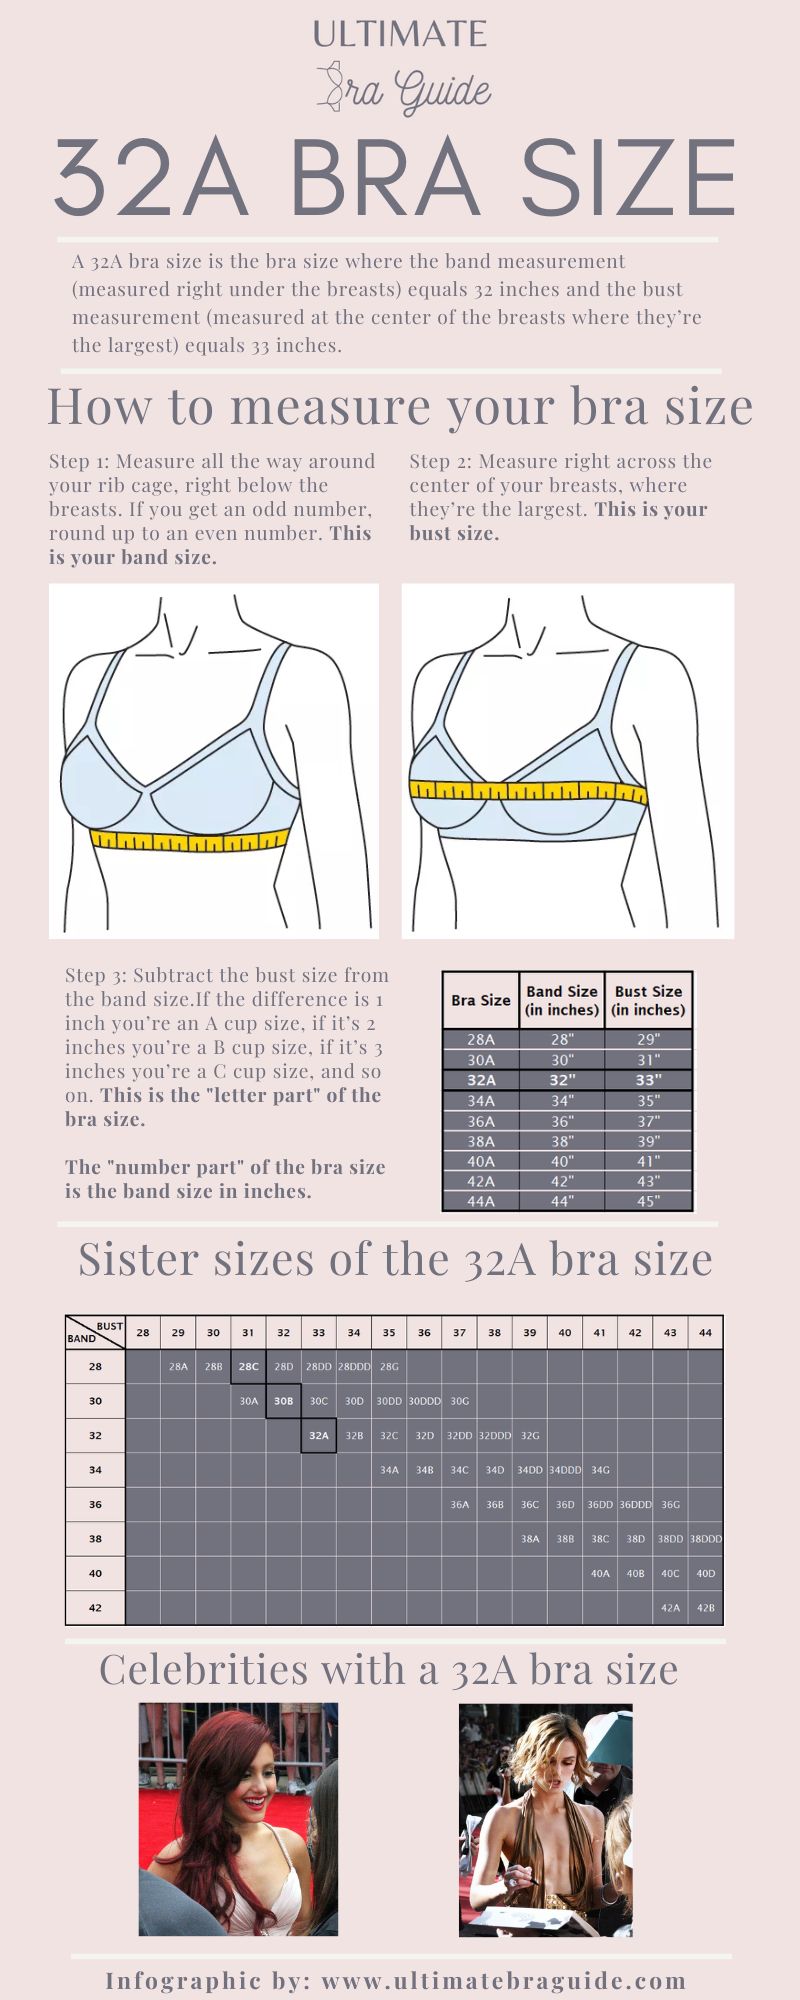 An infographic all about the 32A bra size - what it is, how to measure if you're 32A bra size, 32A bra sister sizes, 32A cup examples, and so on